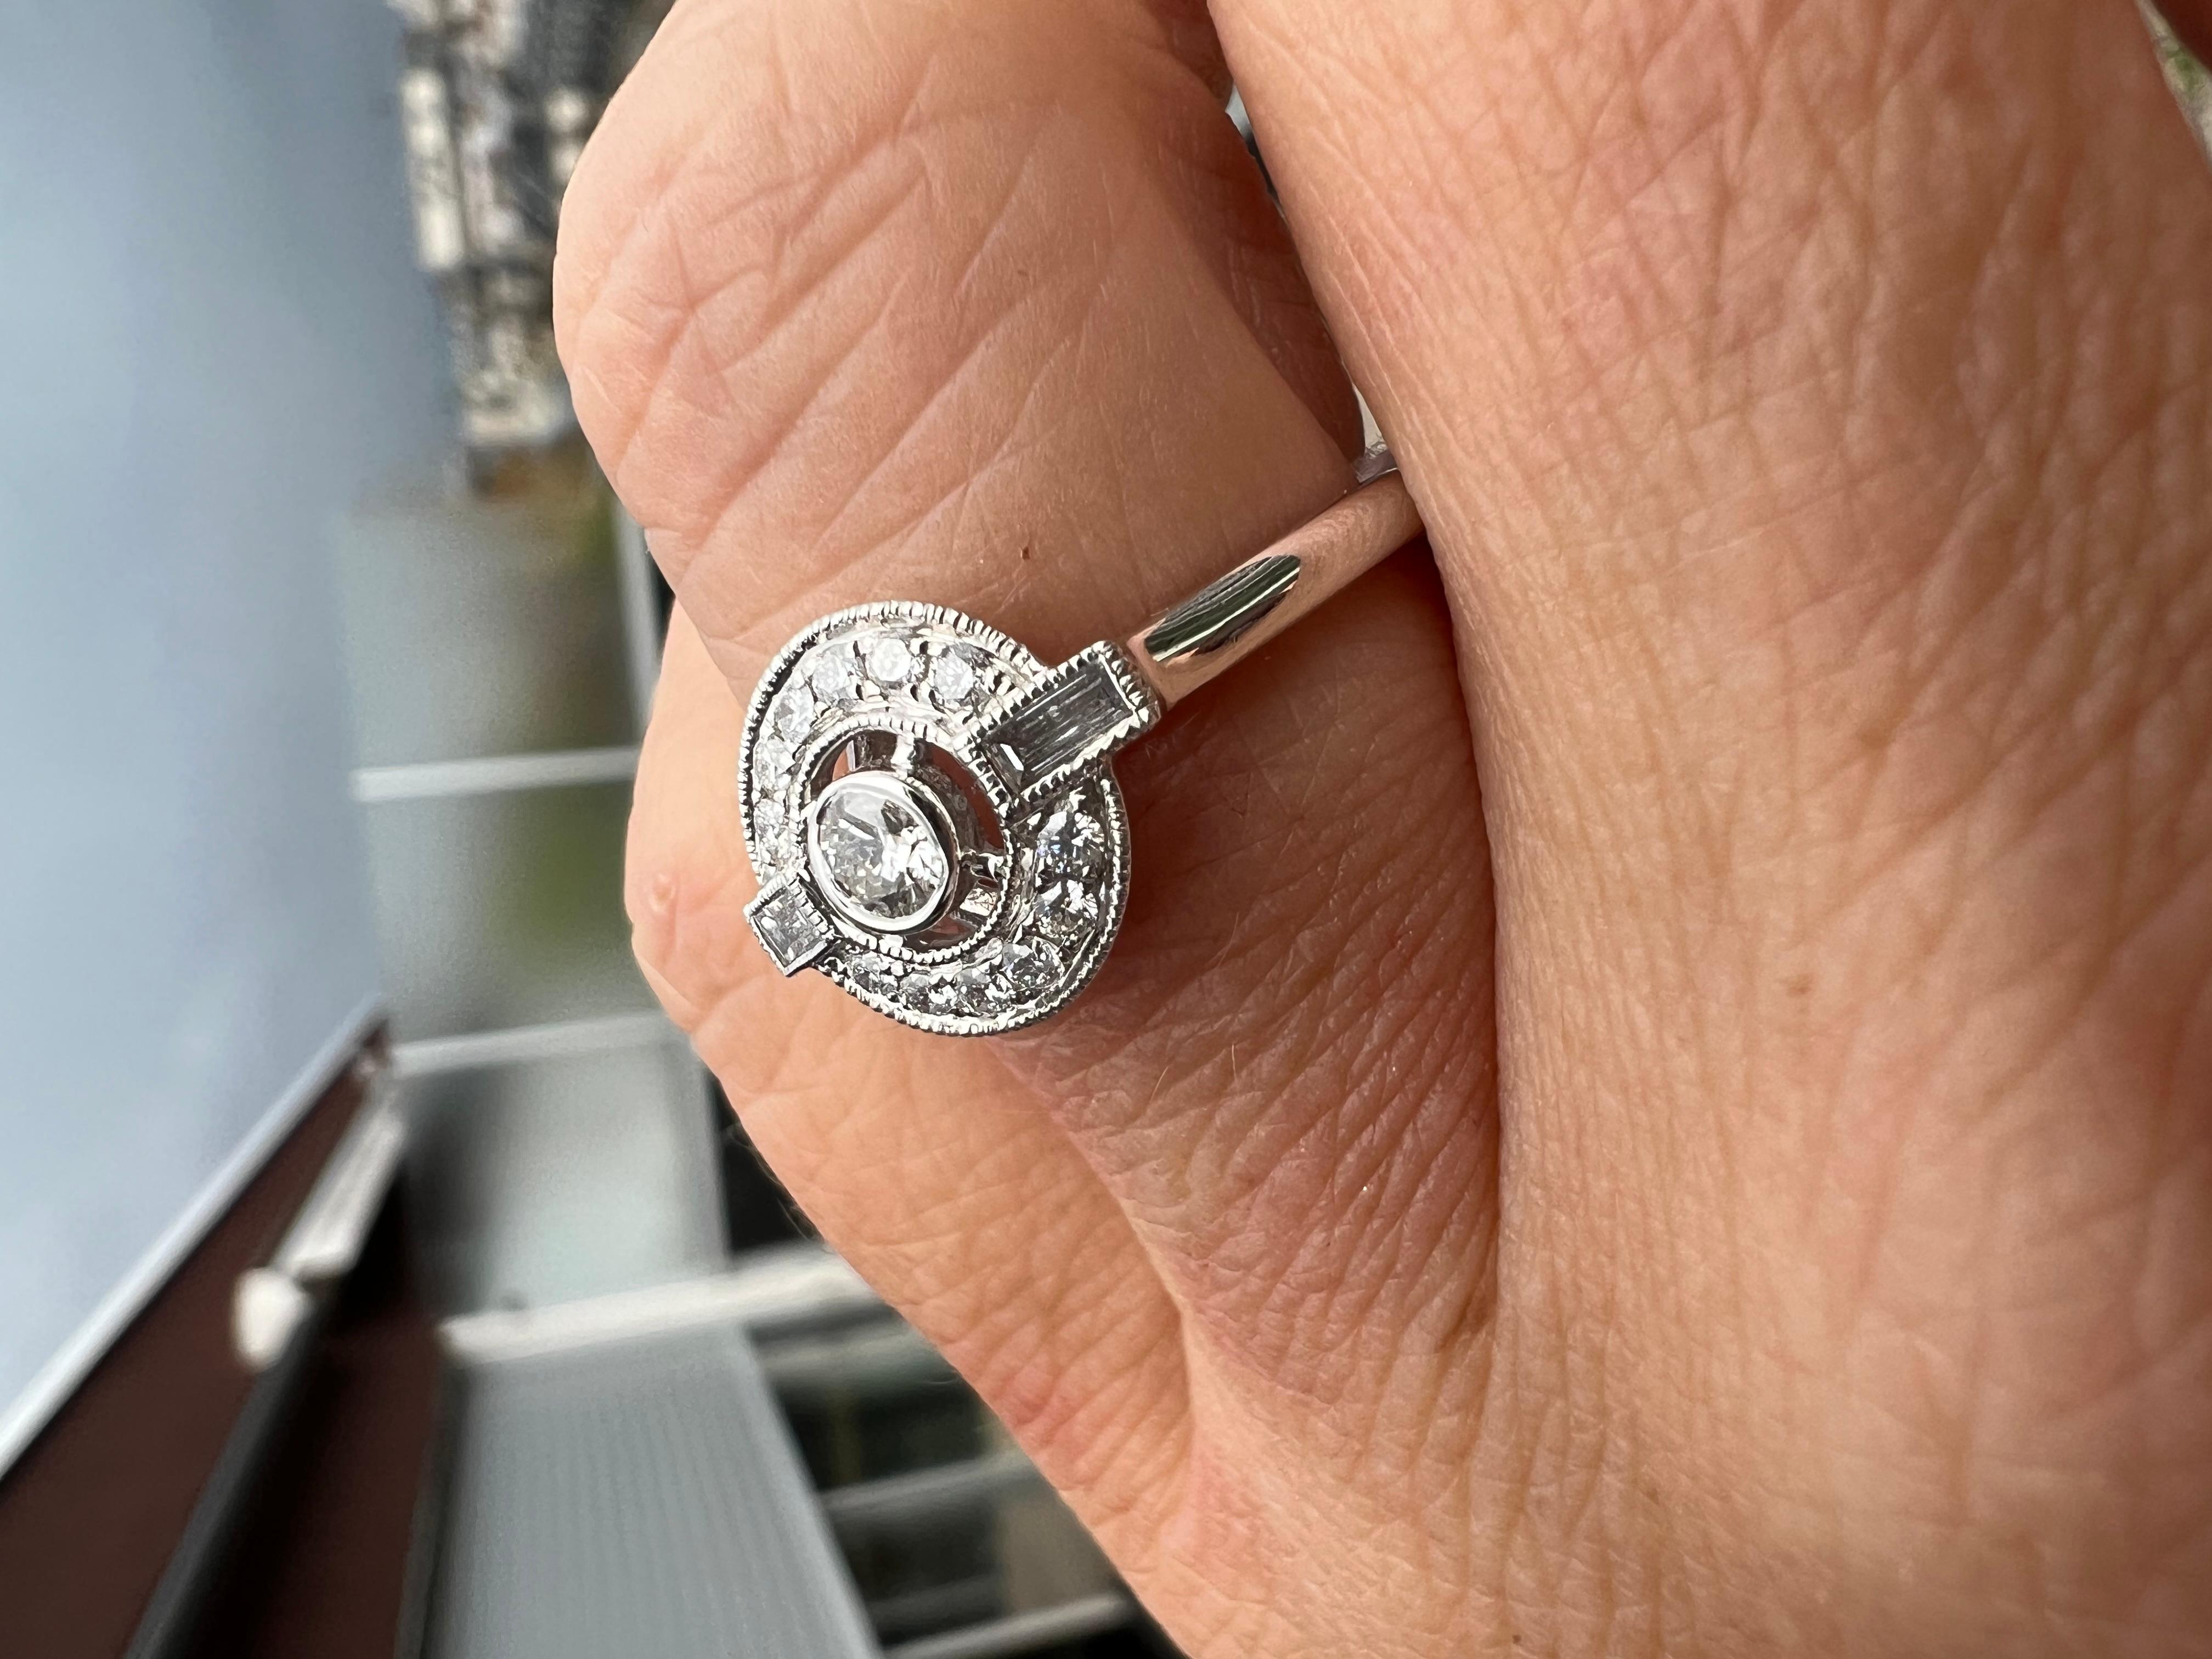 18-Carat White Gold Ring Set With A Paving Of Diamonds 3